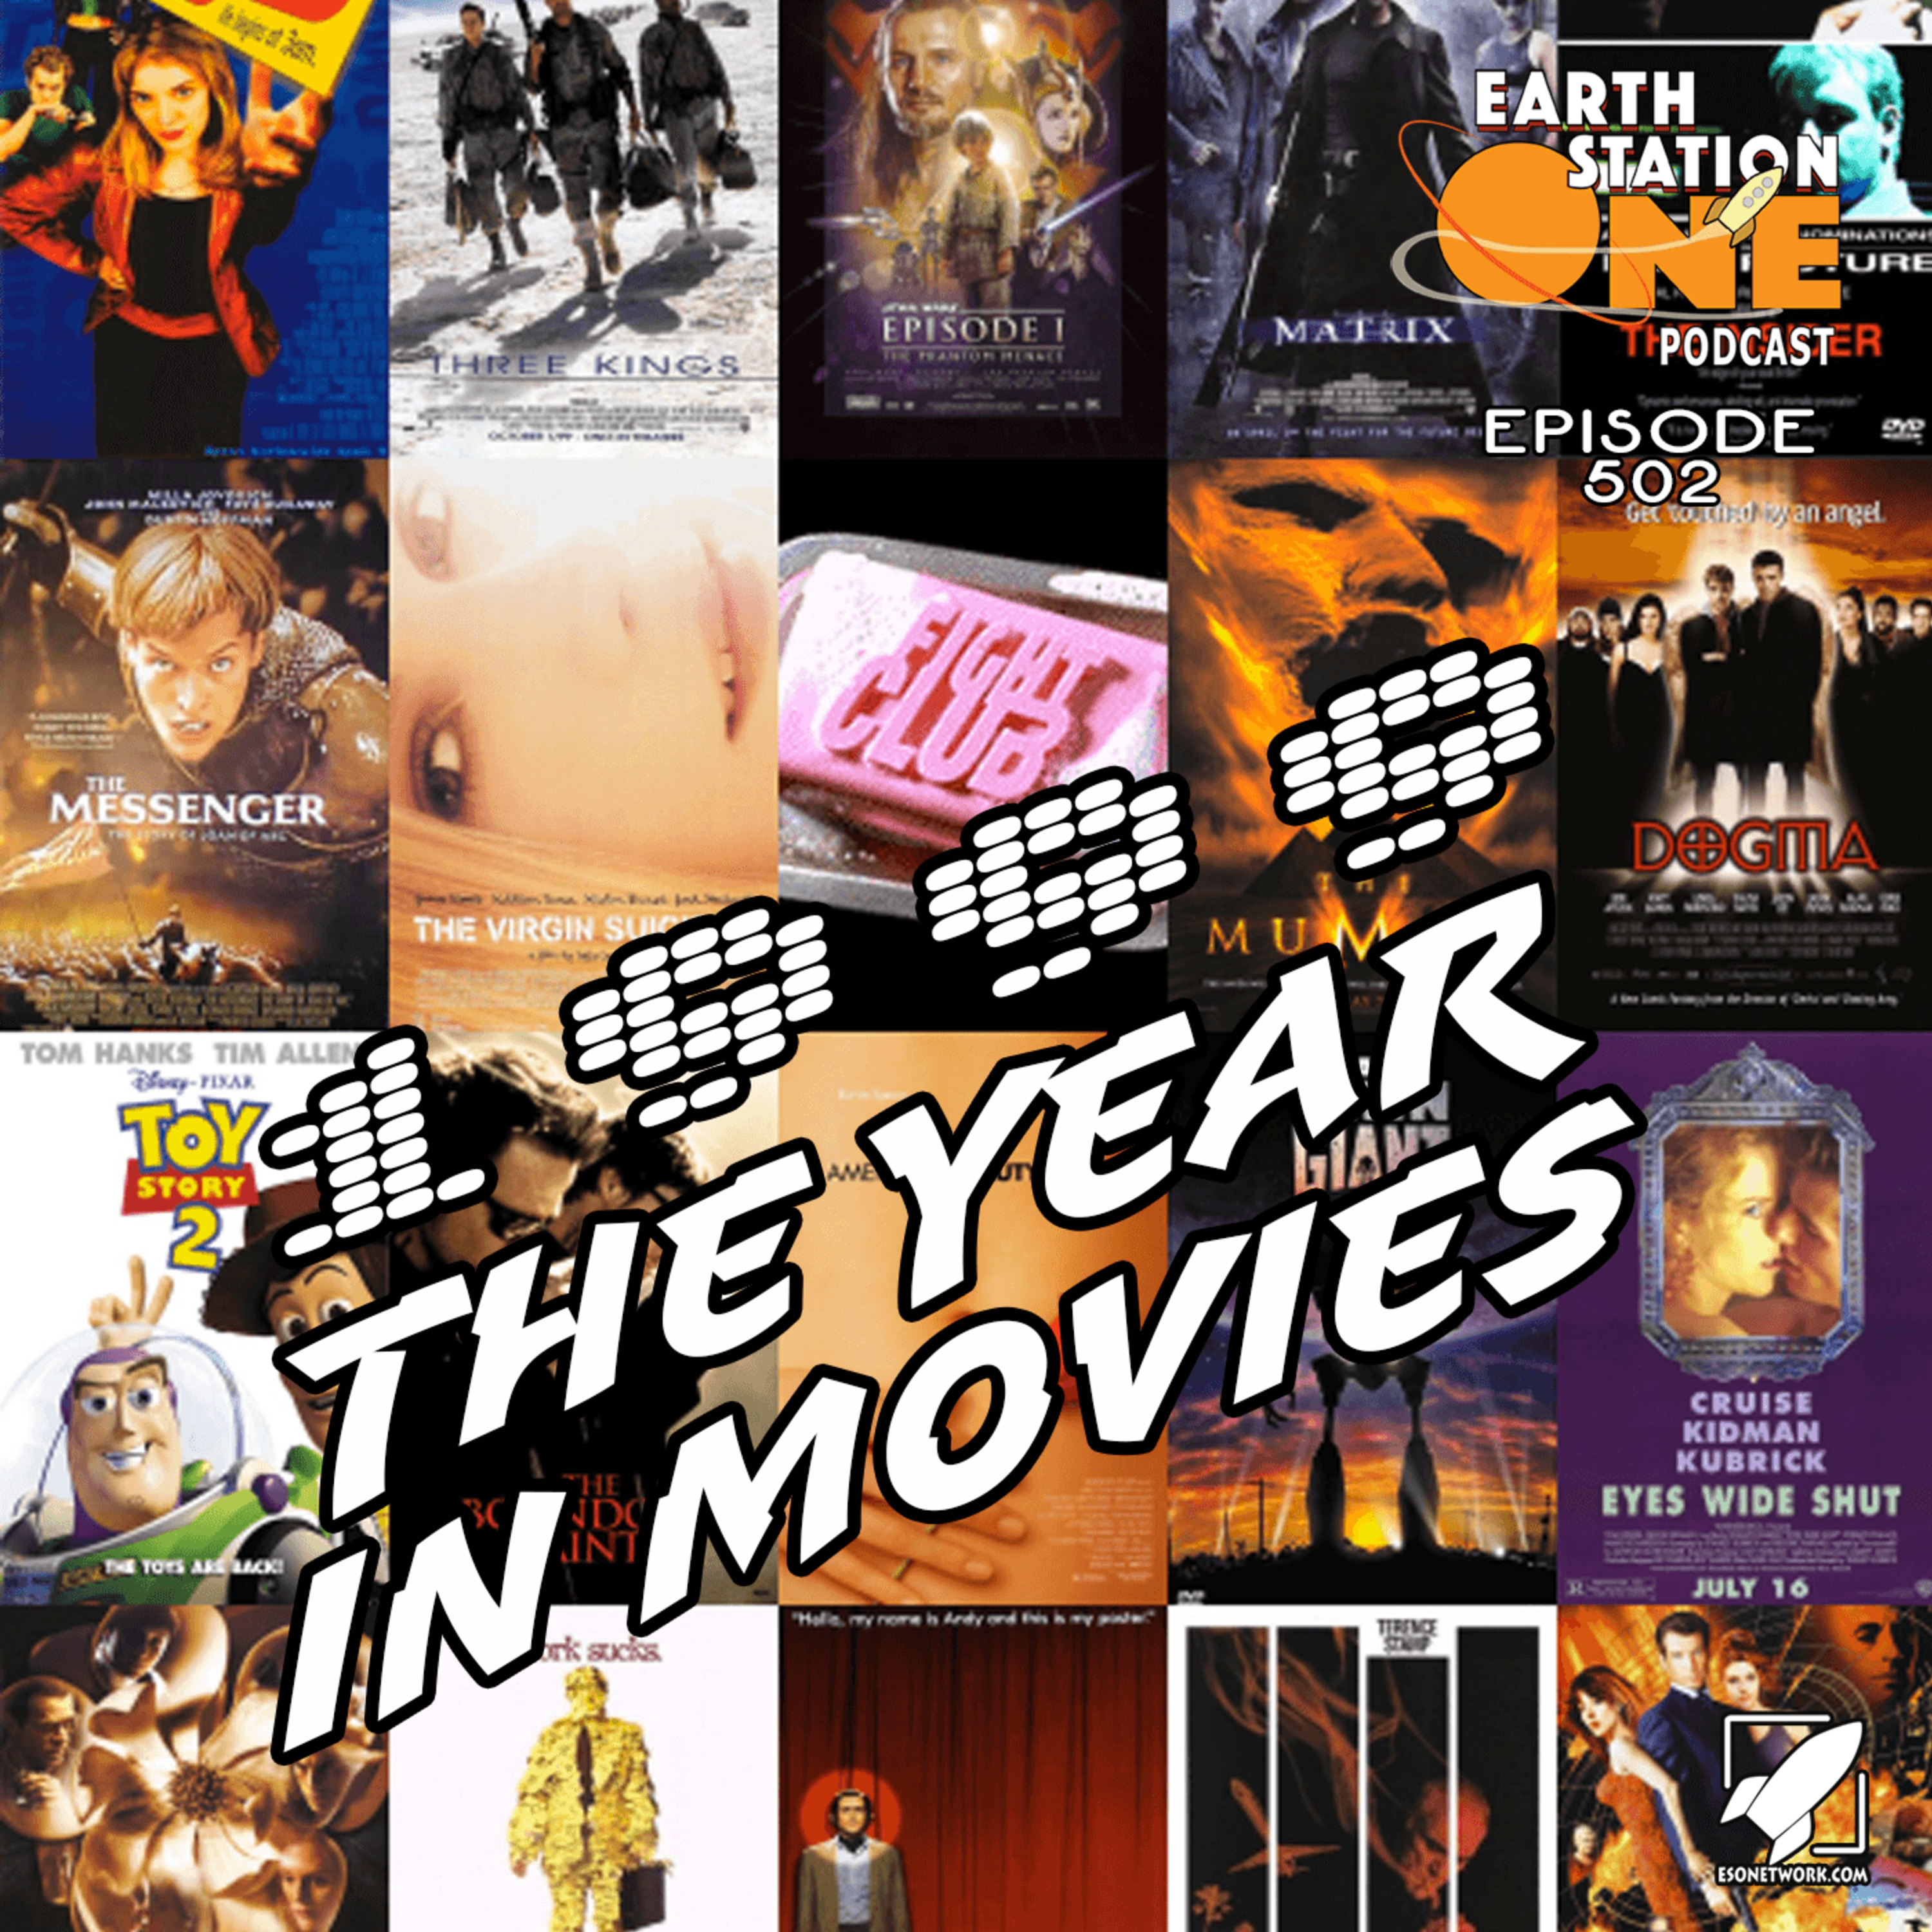 The Earth Station One Podcast – 1999 The Year In Movies